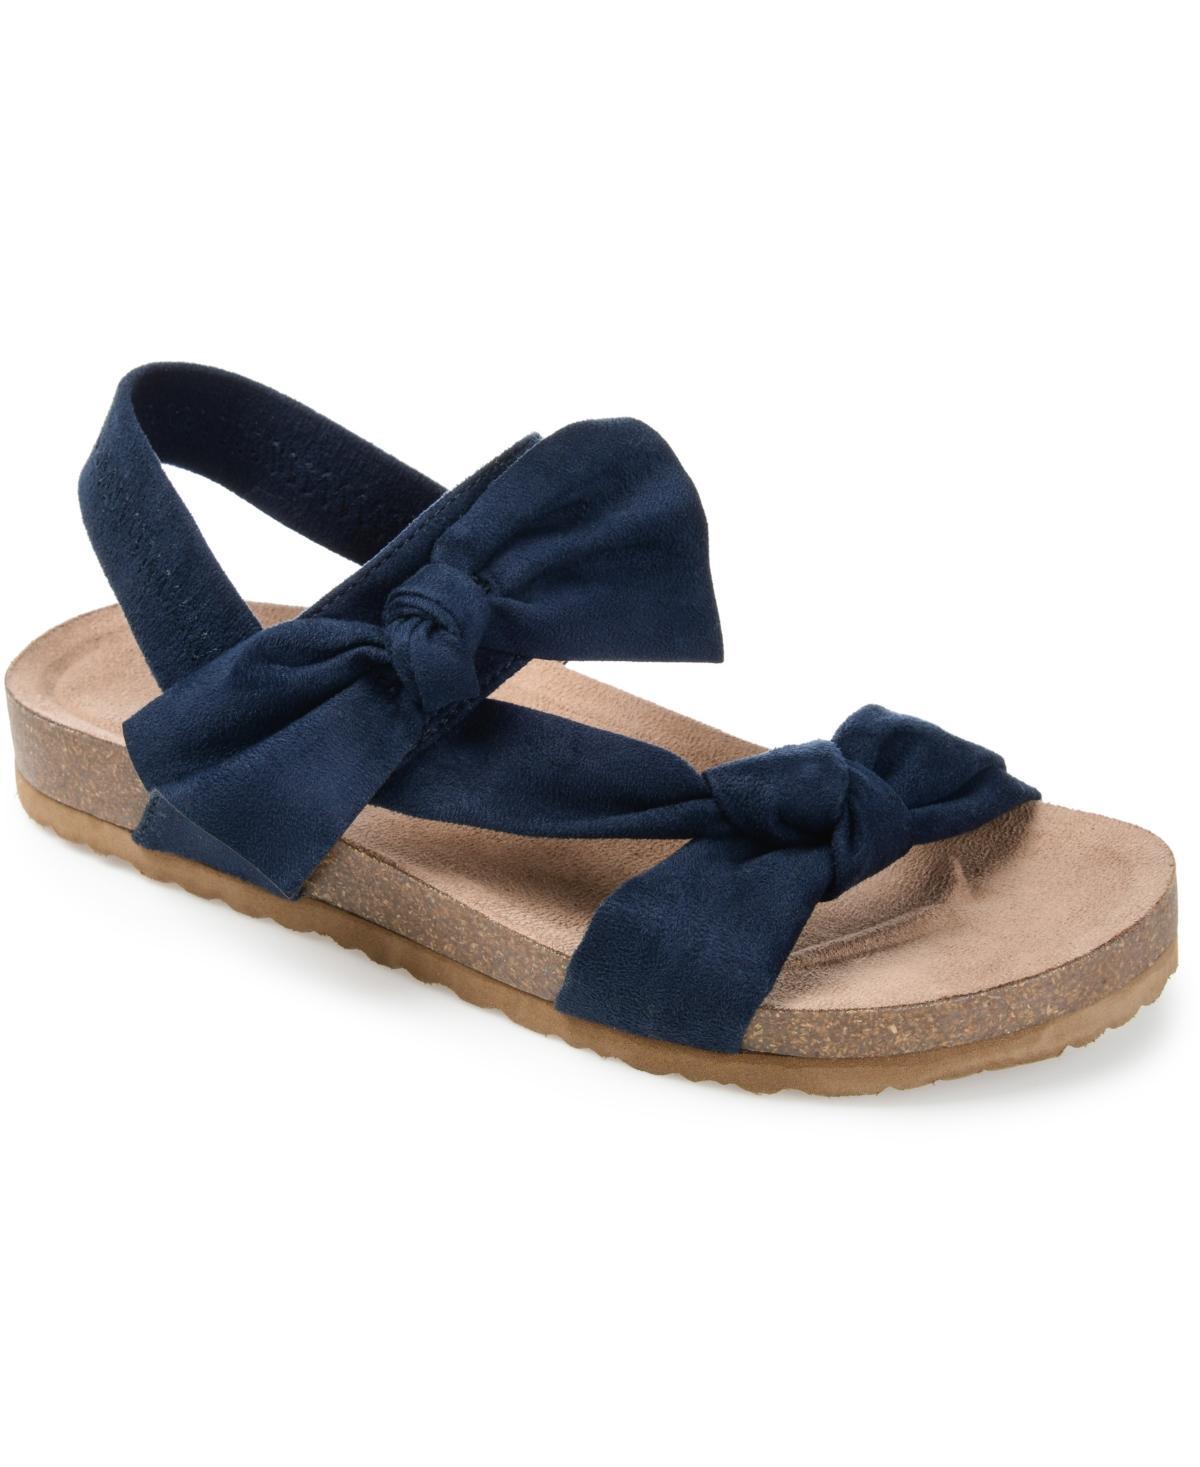 Journee Collection Xanndra Womens Sandals Blue Product Image